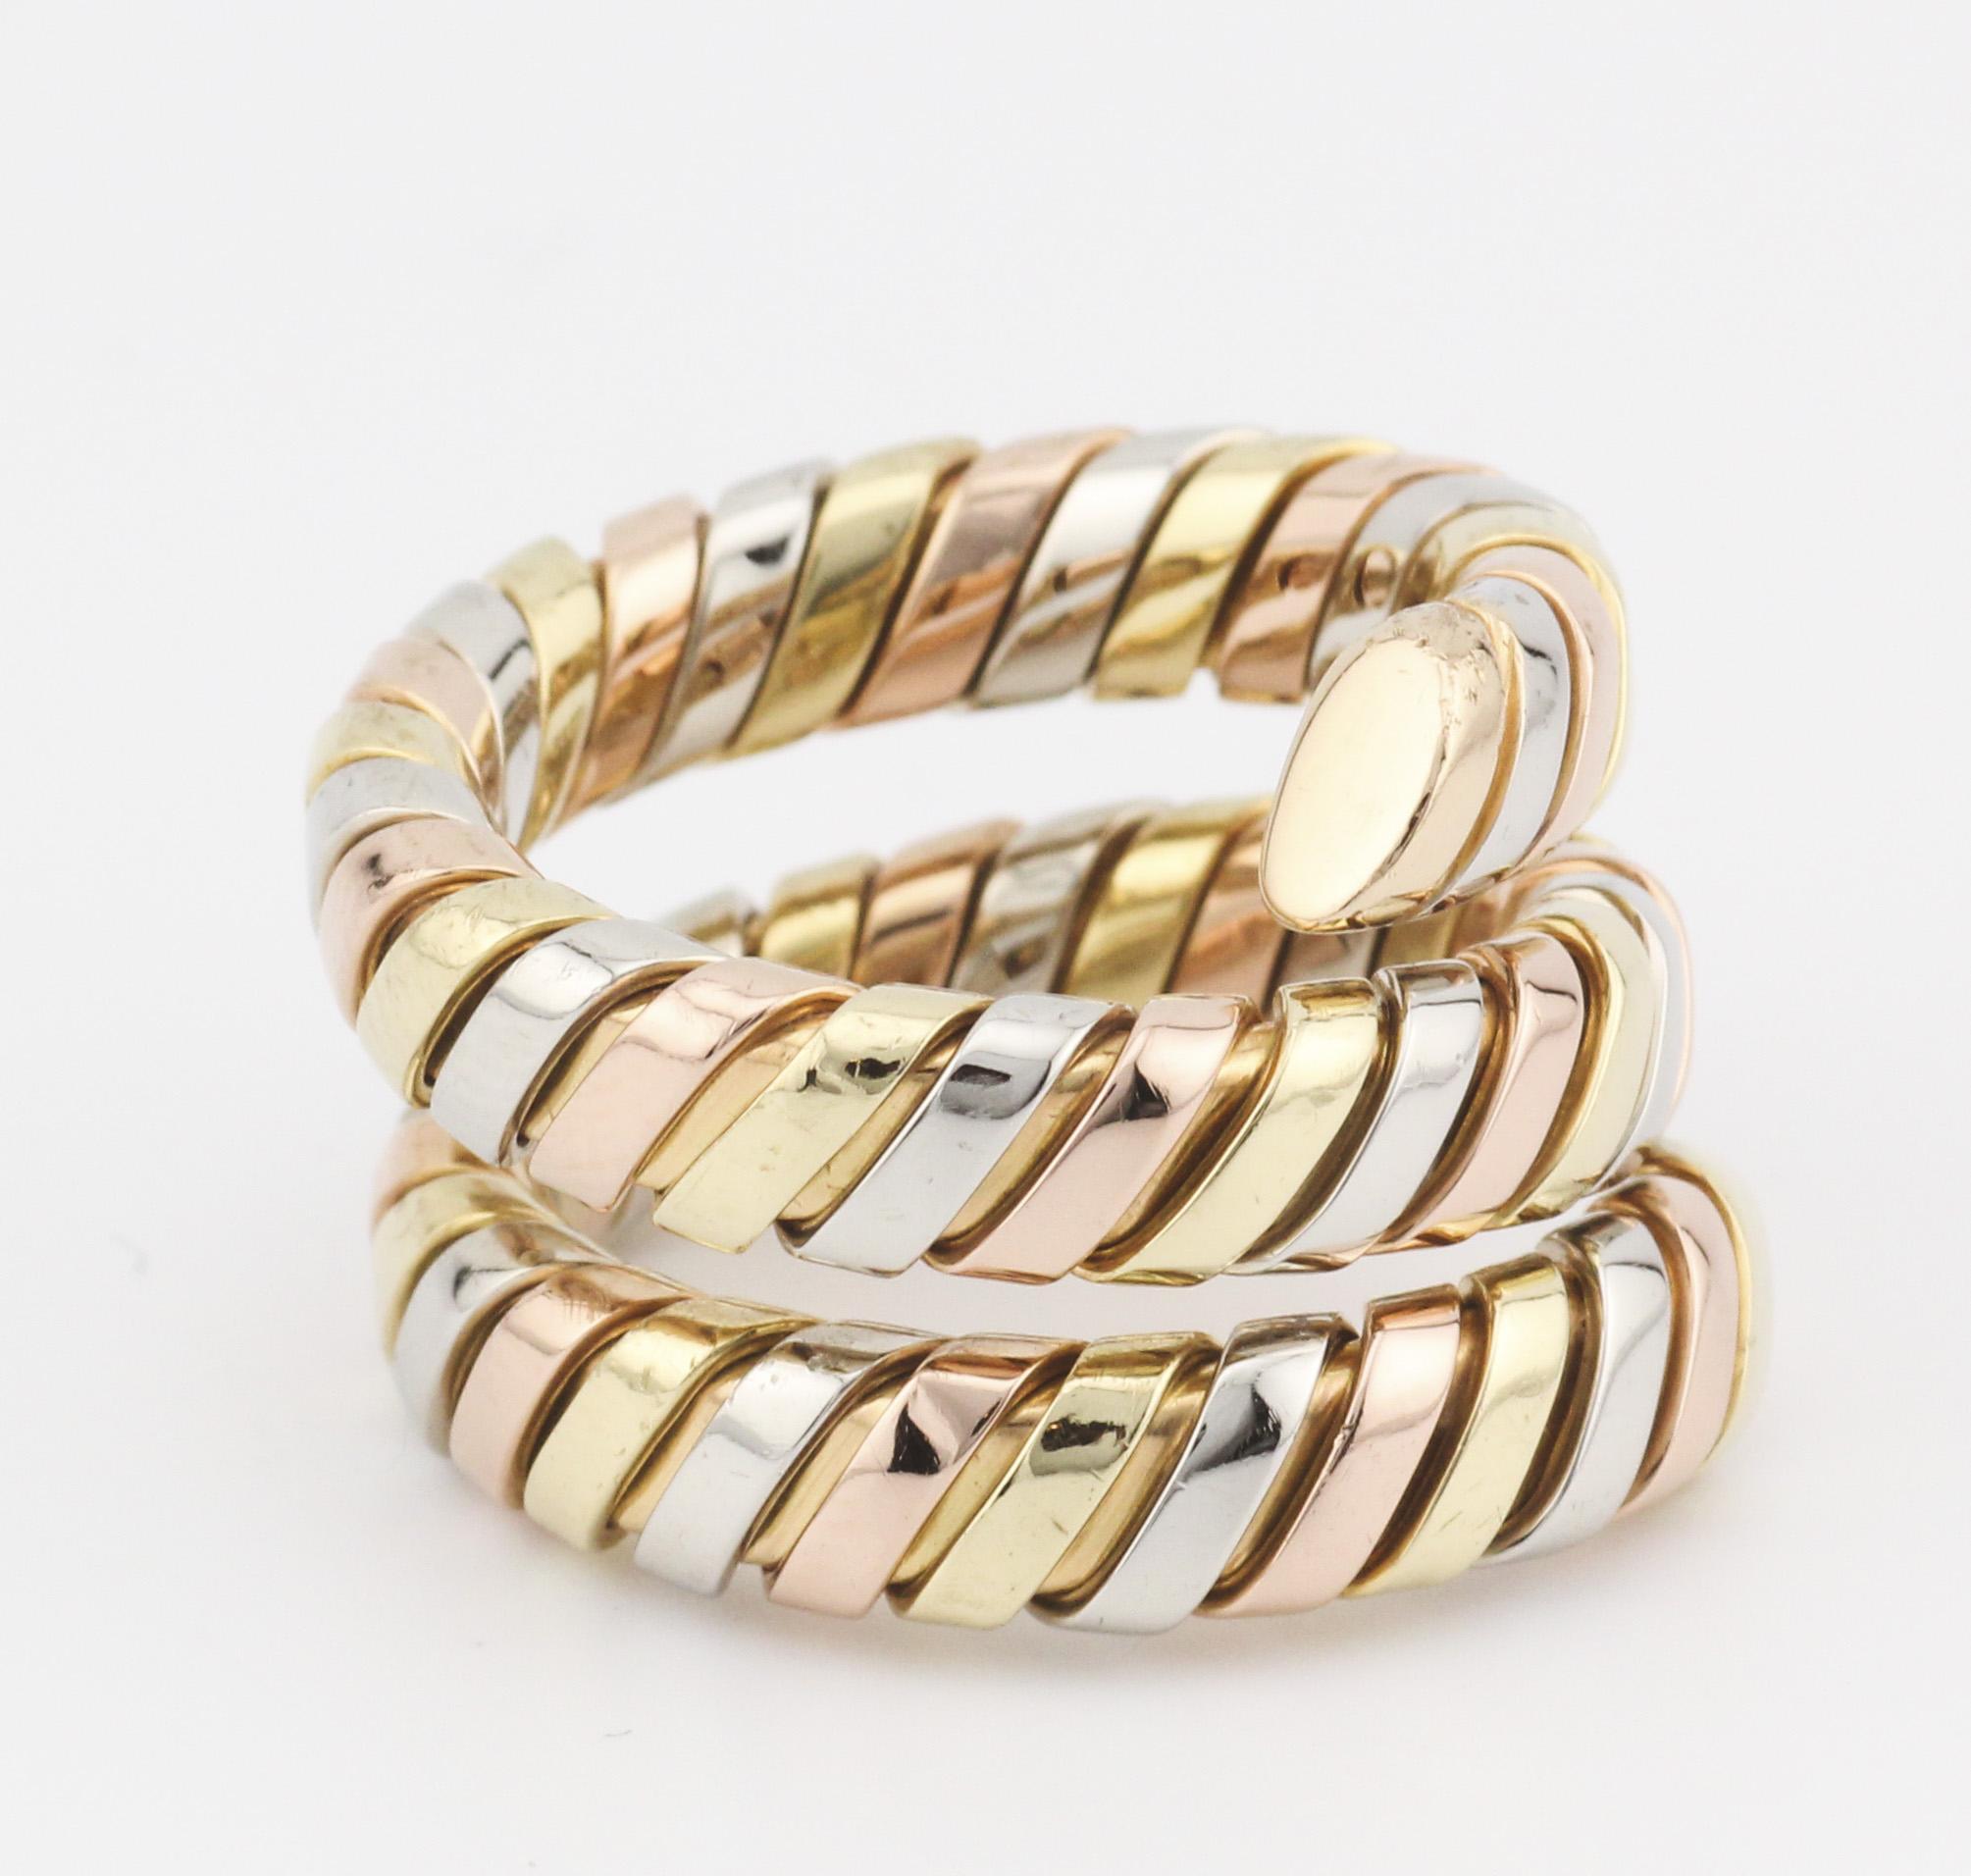 Introducing the Bulgari Tubogas 3 Color 18K Gold Flexible Snake Ring—a mesmerizing blend of iconic design and luxurious craftsmanship from the esteemed Italian jewelry house, Bulgari. This ring is an exquisite representation of the Tubogas